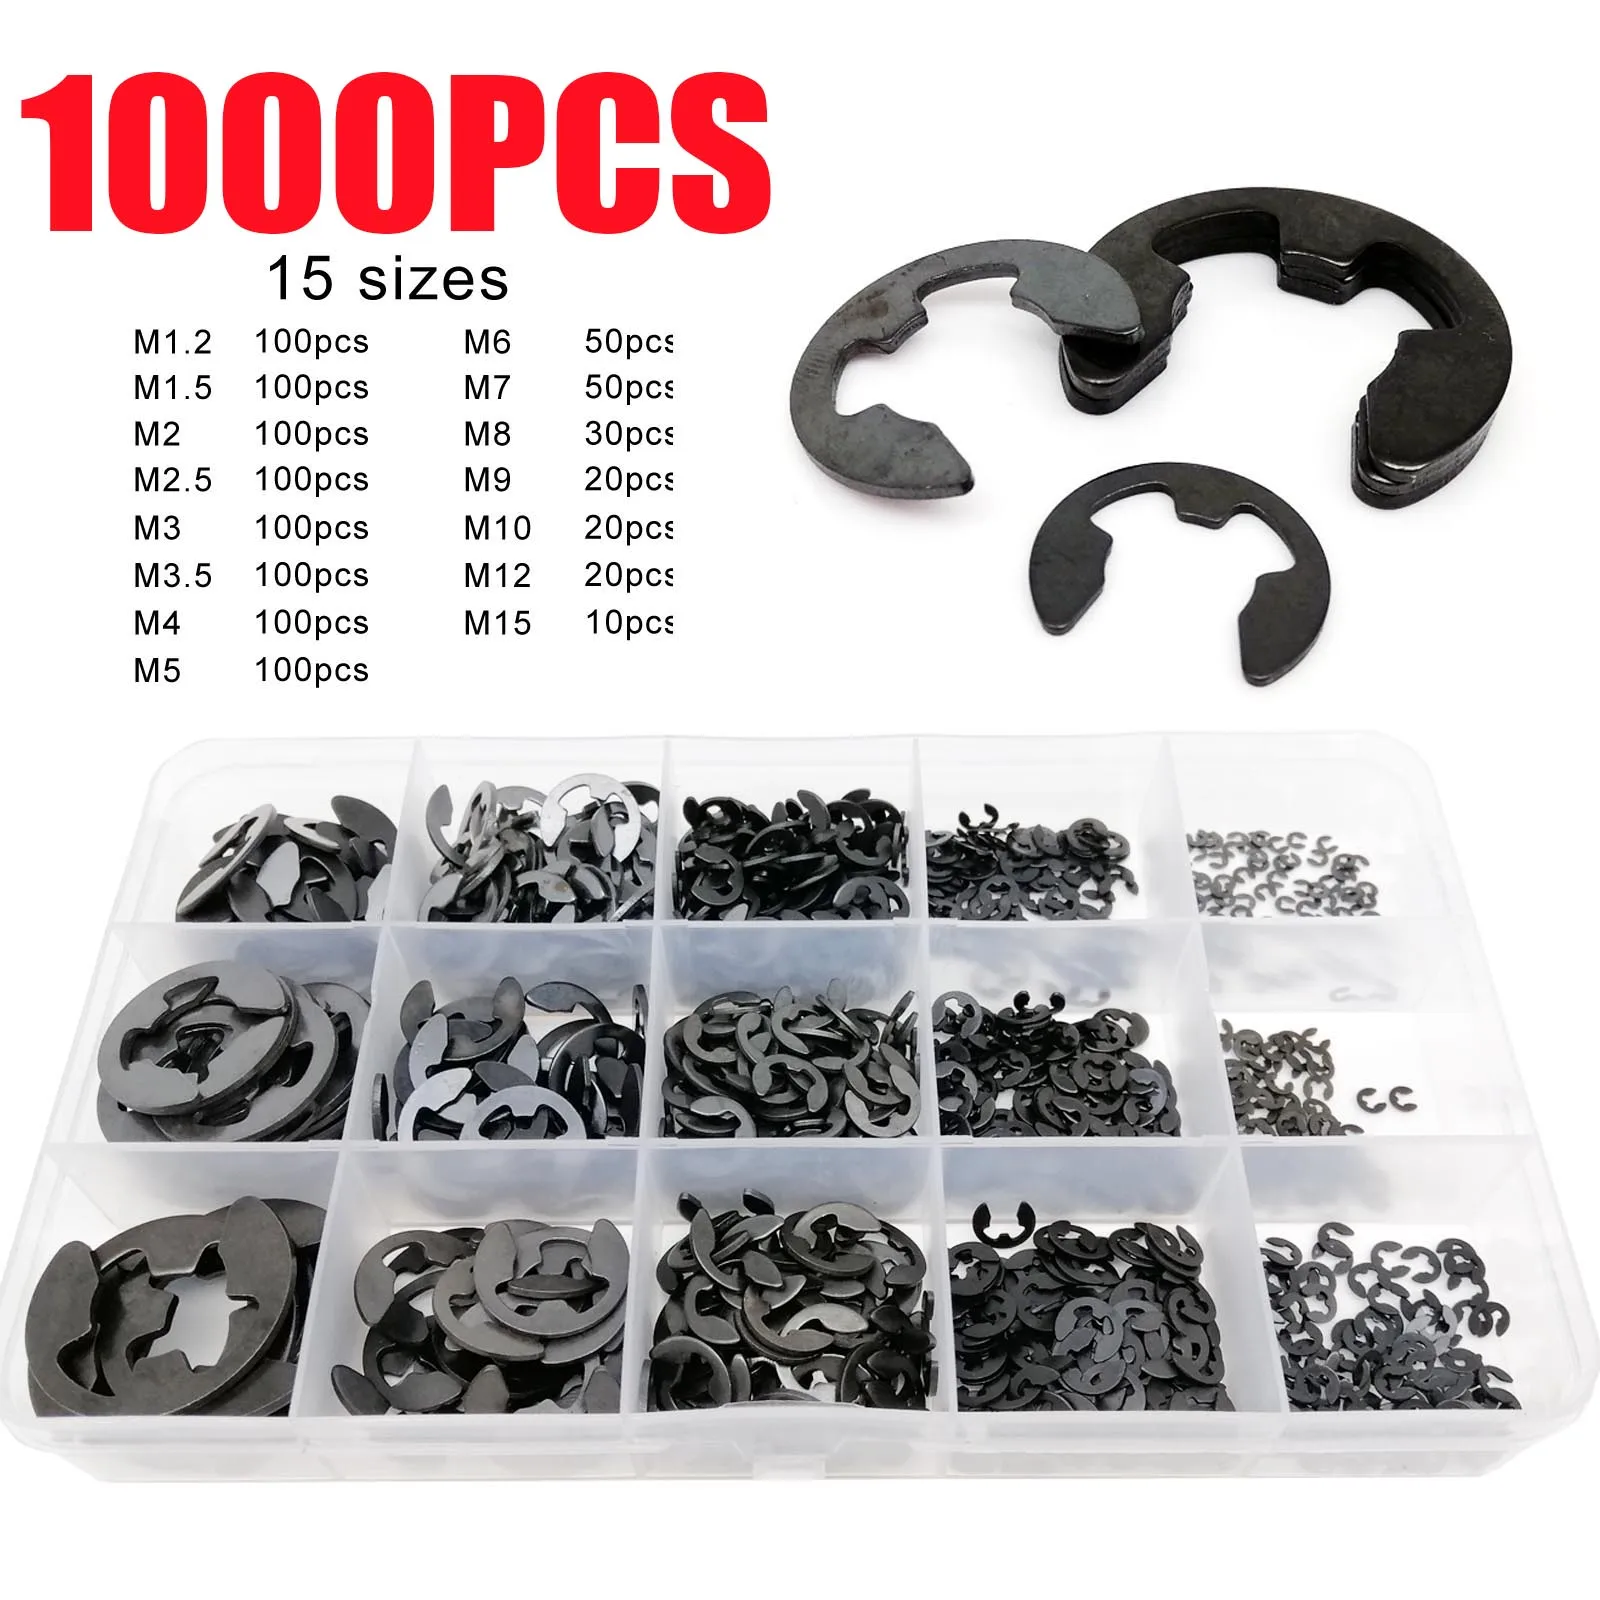 580/1000pcs Carbon Steel Washer M1.2 to M15 Black External Retaining Ring E Clip Snap Circlip Washer for Shaft Assortment Kit